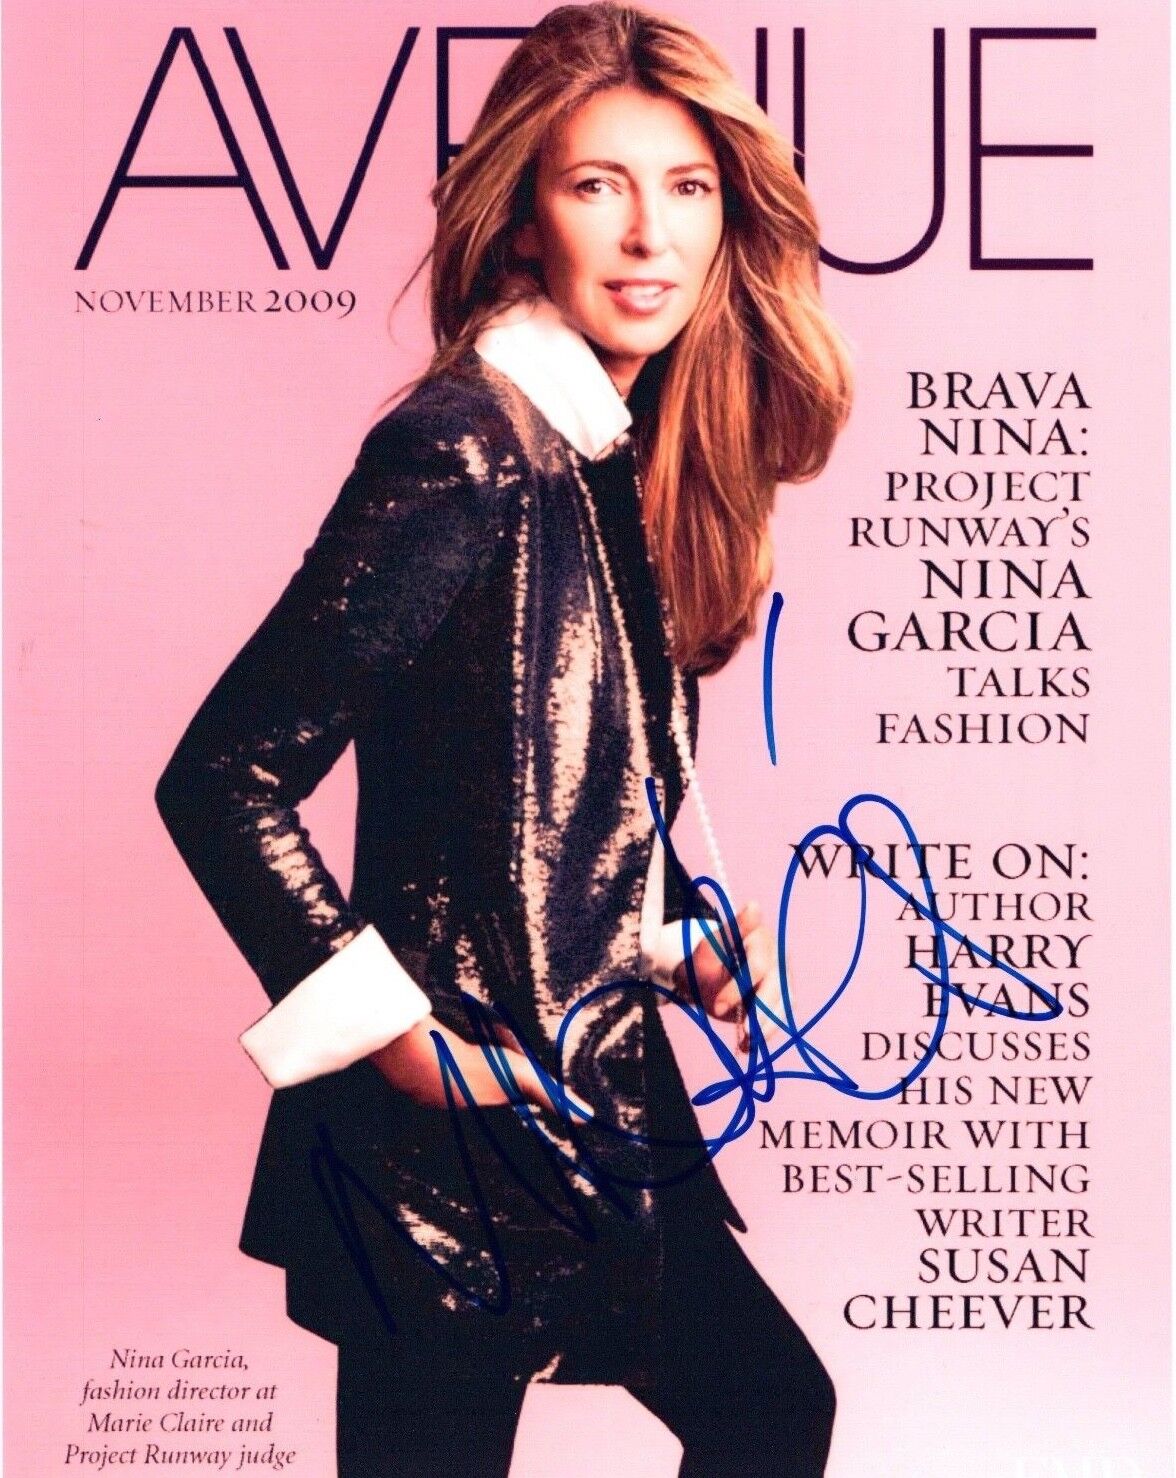 Nina Garcia Signed Autographed 8x10 Photo Poster painting Fashion Editor Project Runway COA VD